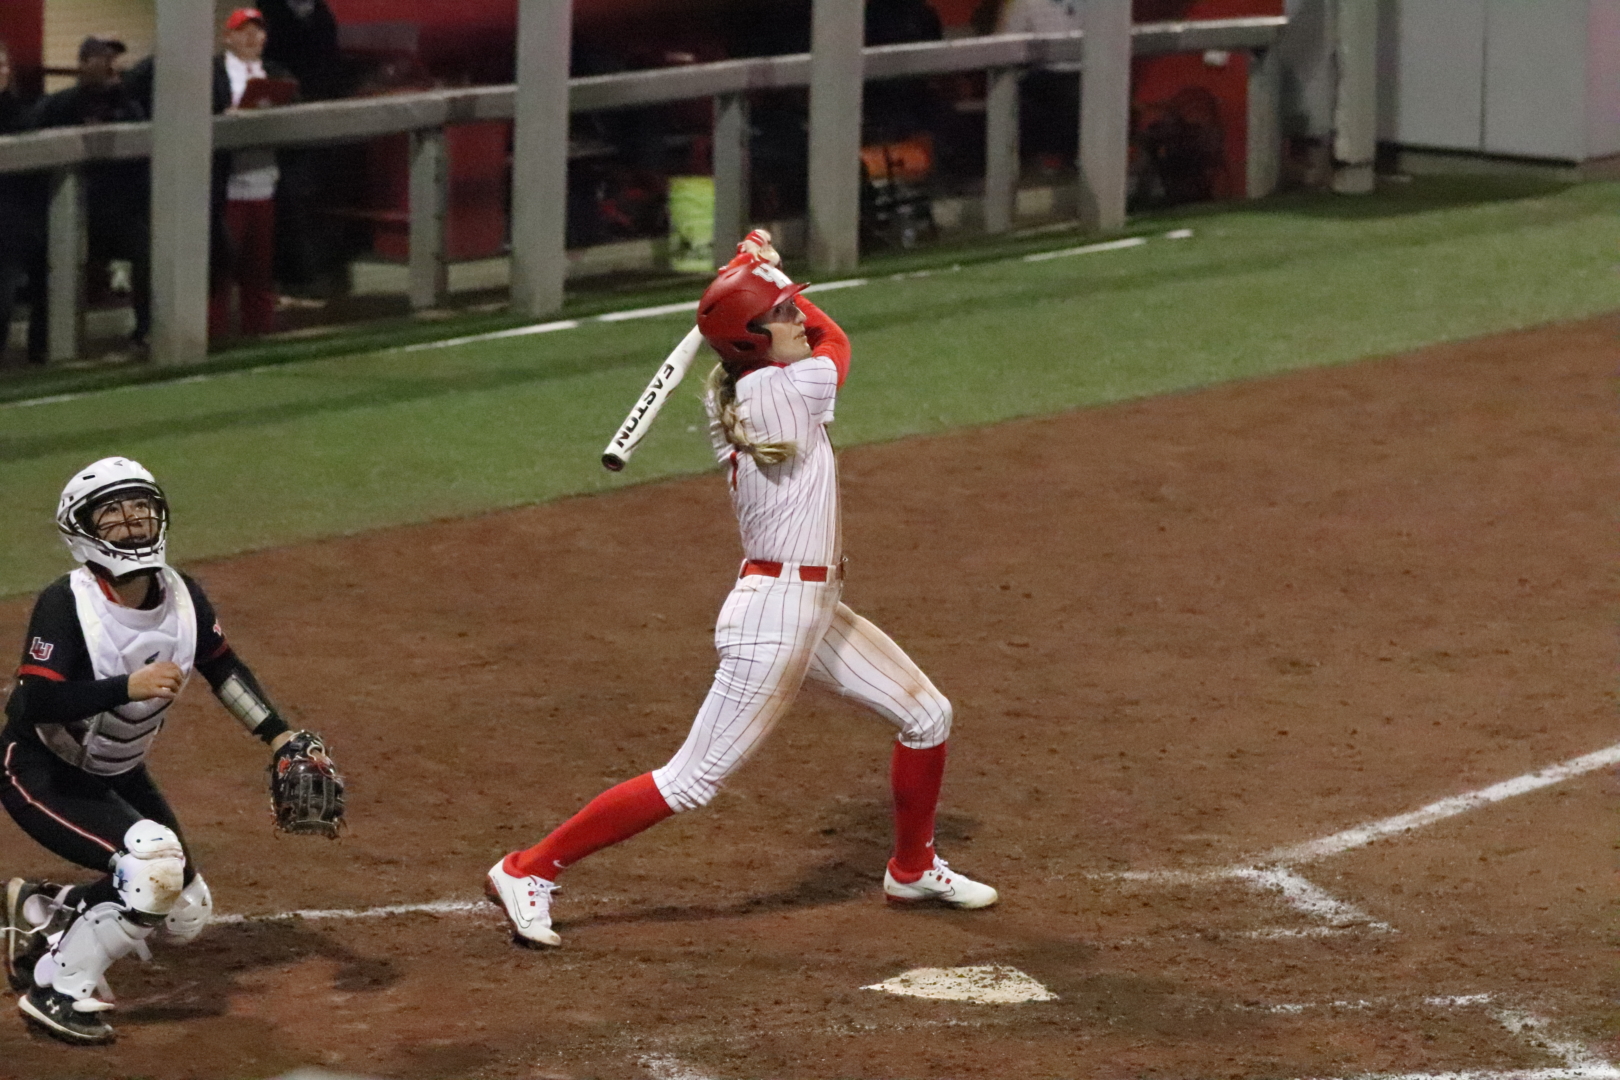 Becca Schulte hit three home runs for UH softball during the Boyd Gaming Classic over the weekend. | James Mueller/The Cougar